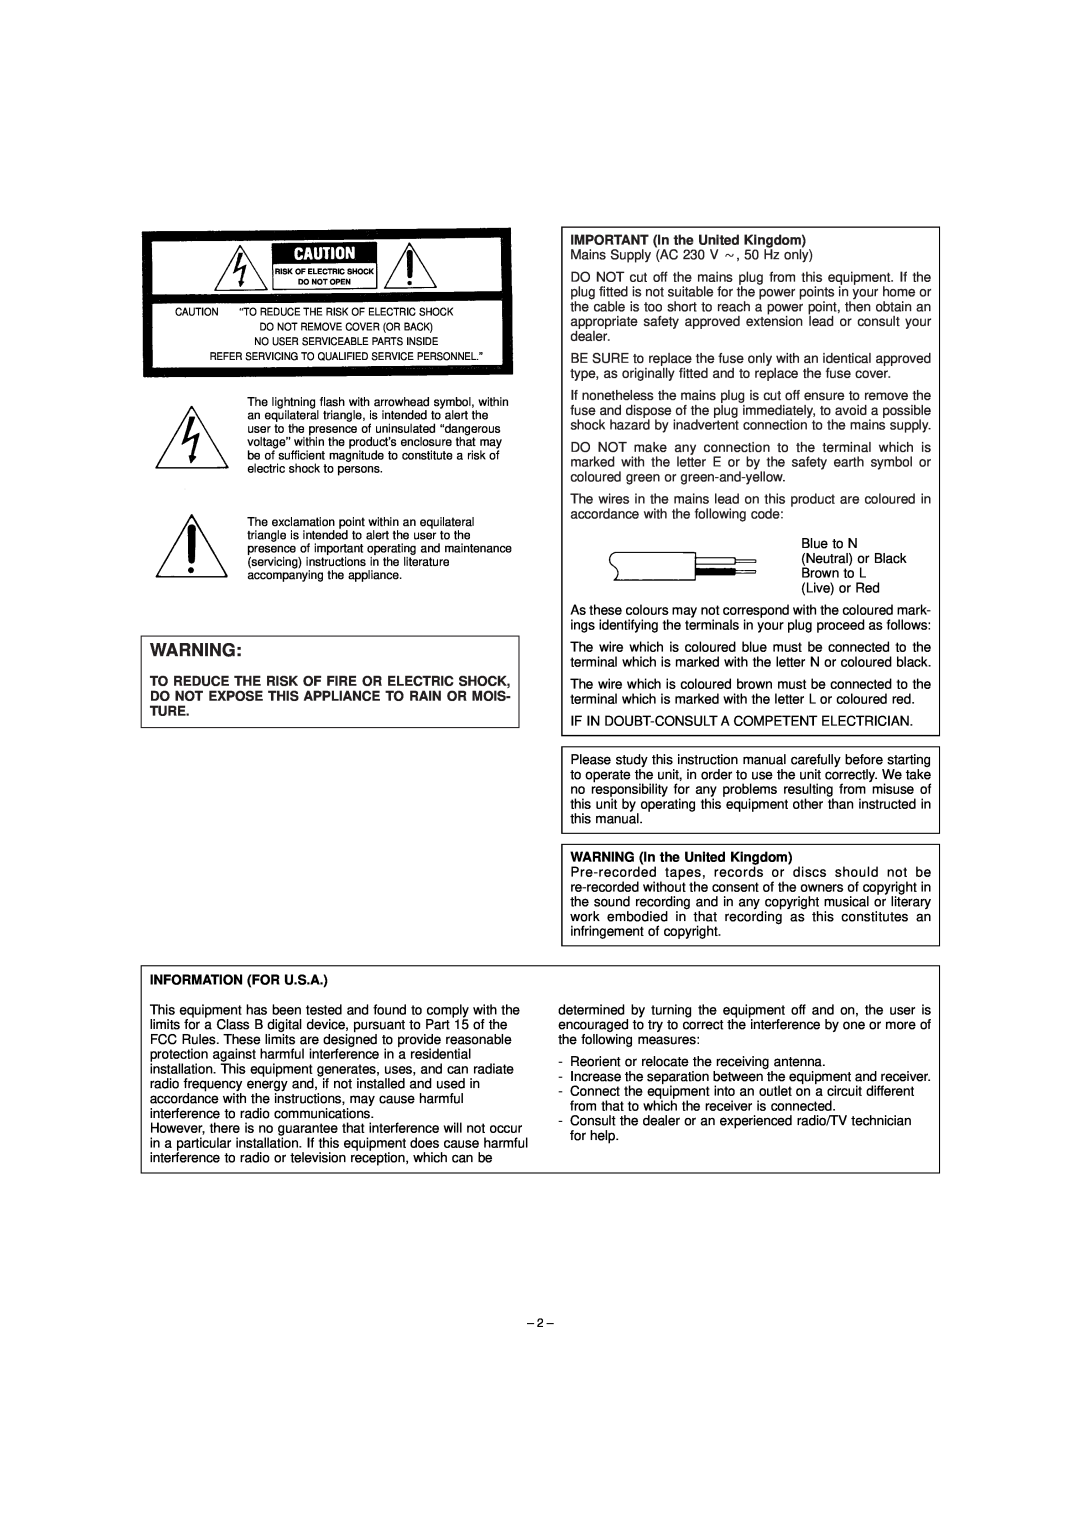 JVC TD-W354 manual IMPORTANT In the United Kingdom, WARNING In the United Kingdom, Information For U.S.A 